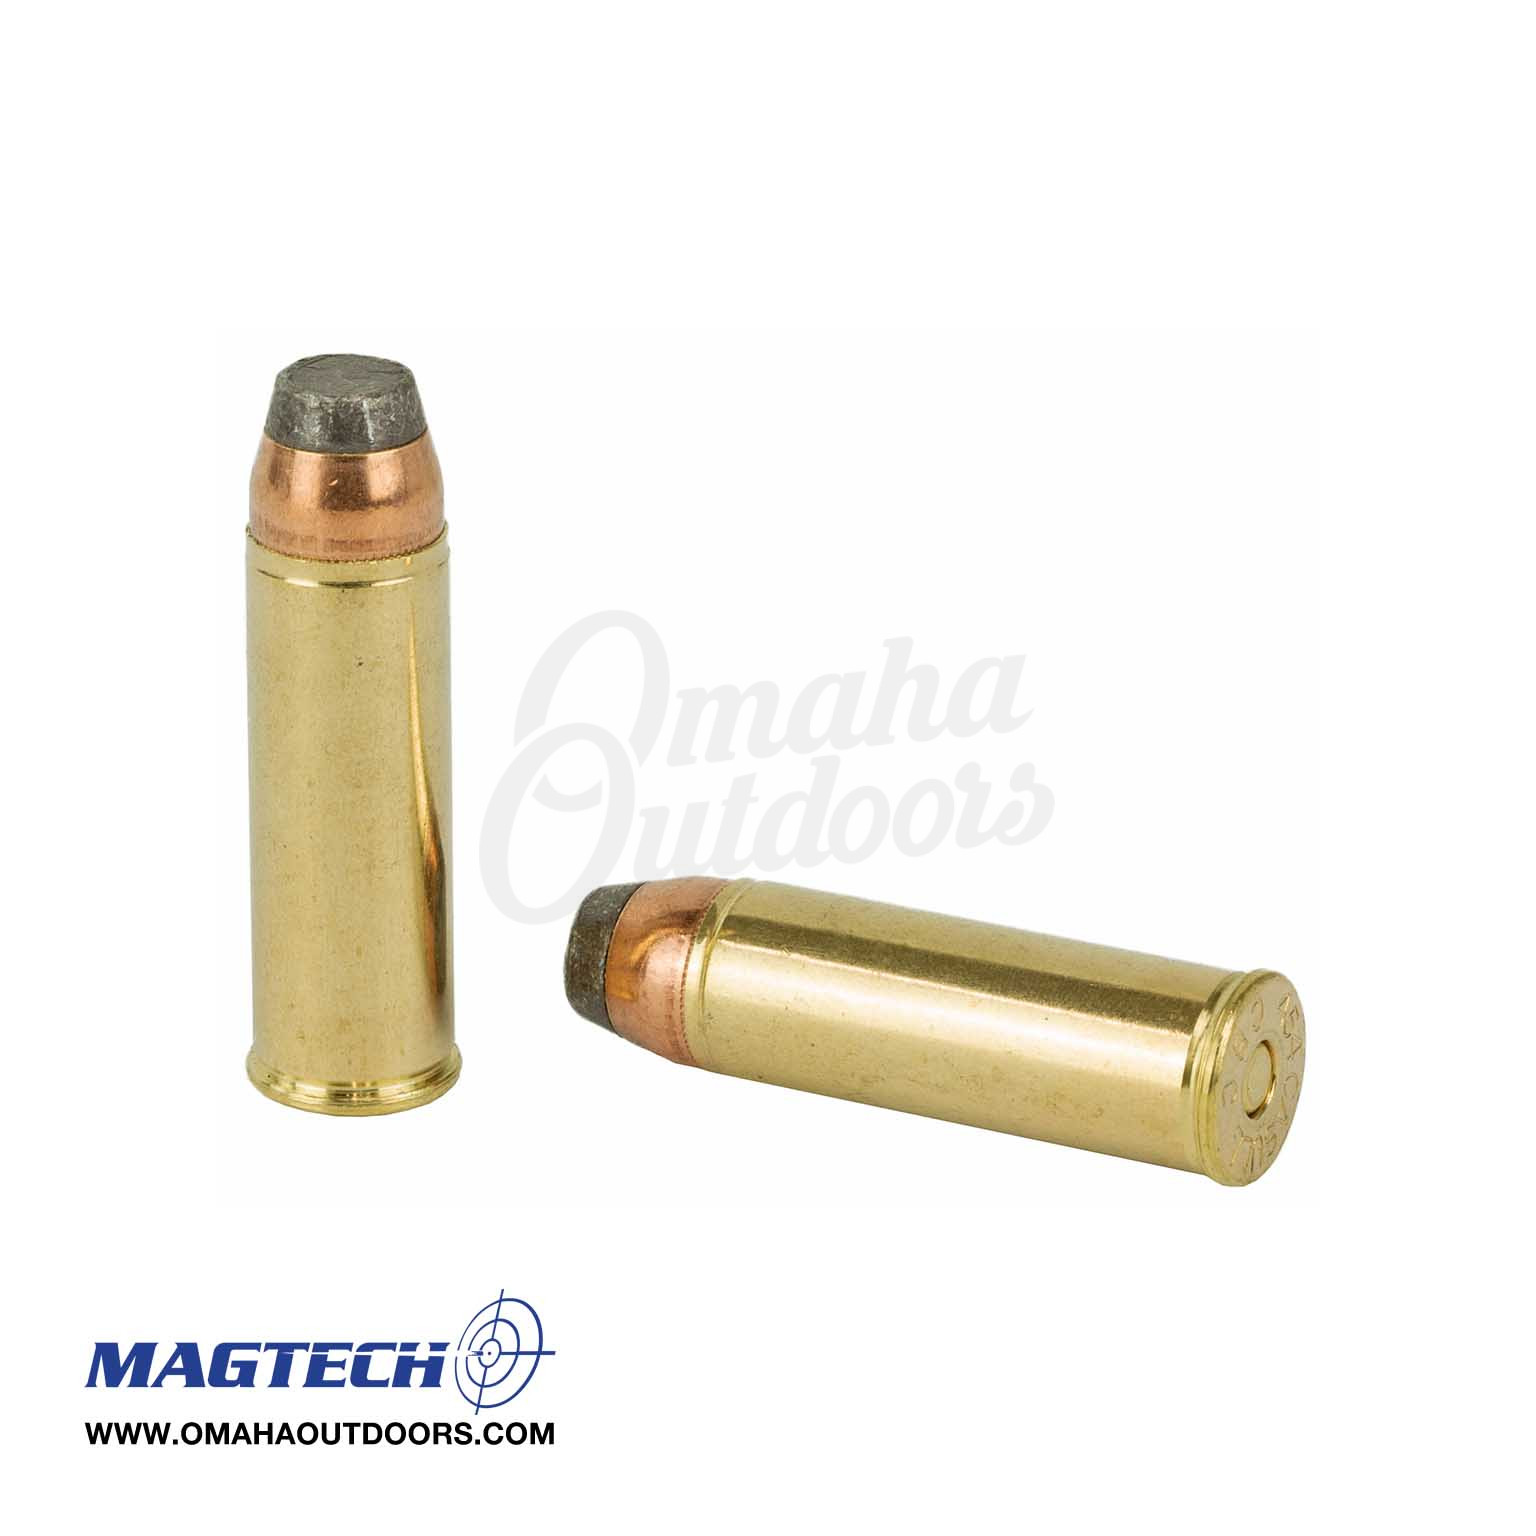 2 Boxes New Magtech 410 Brass Cases F/S